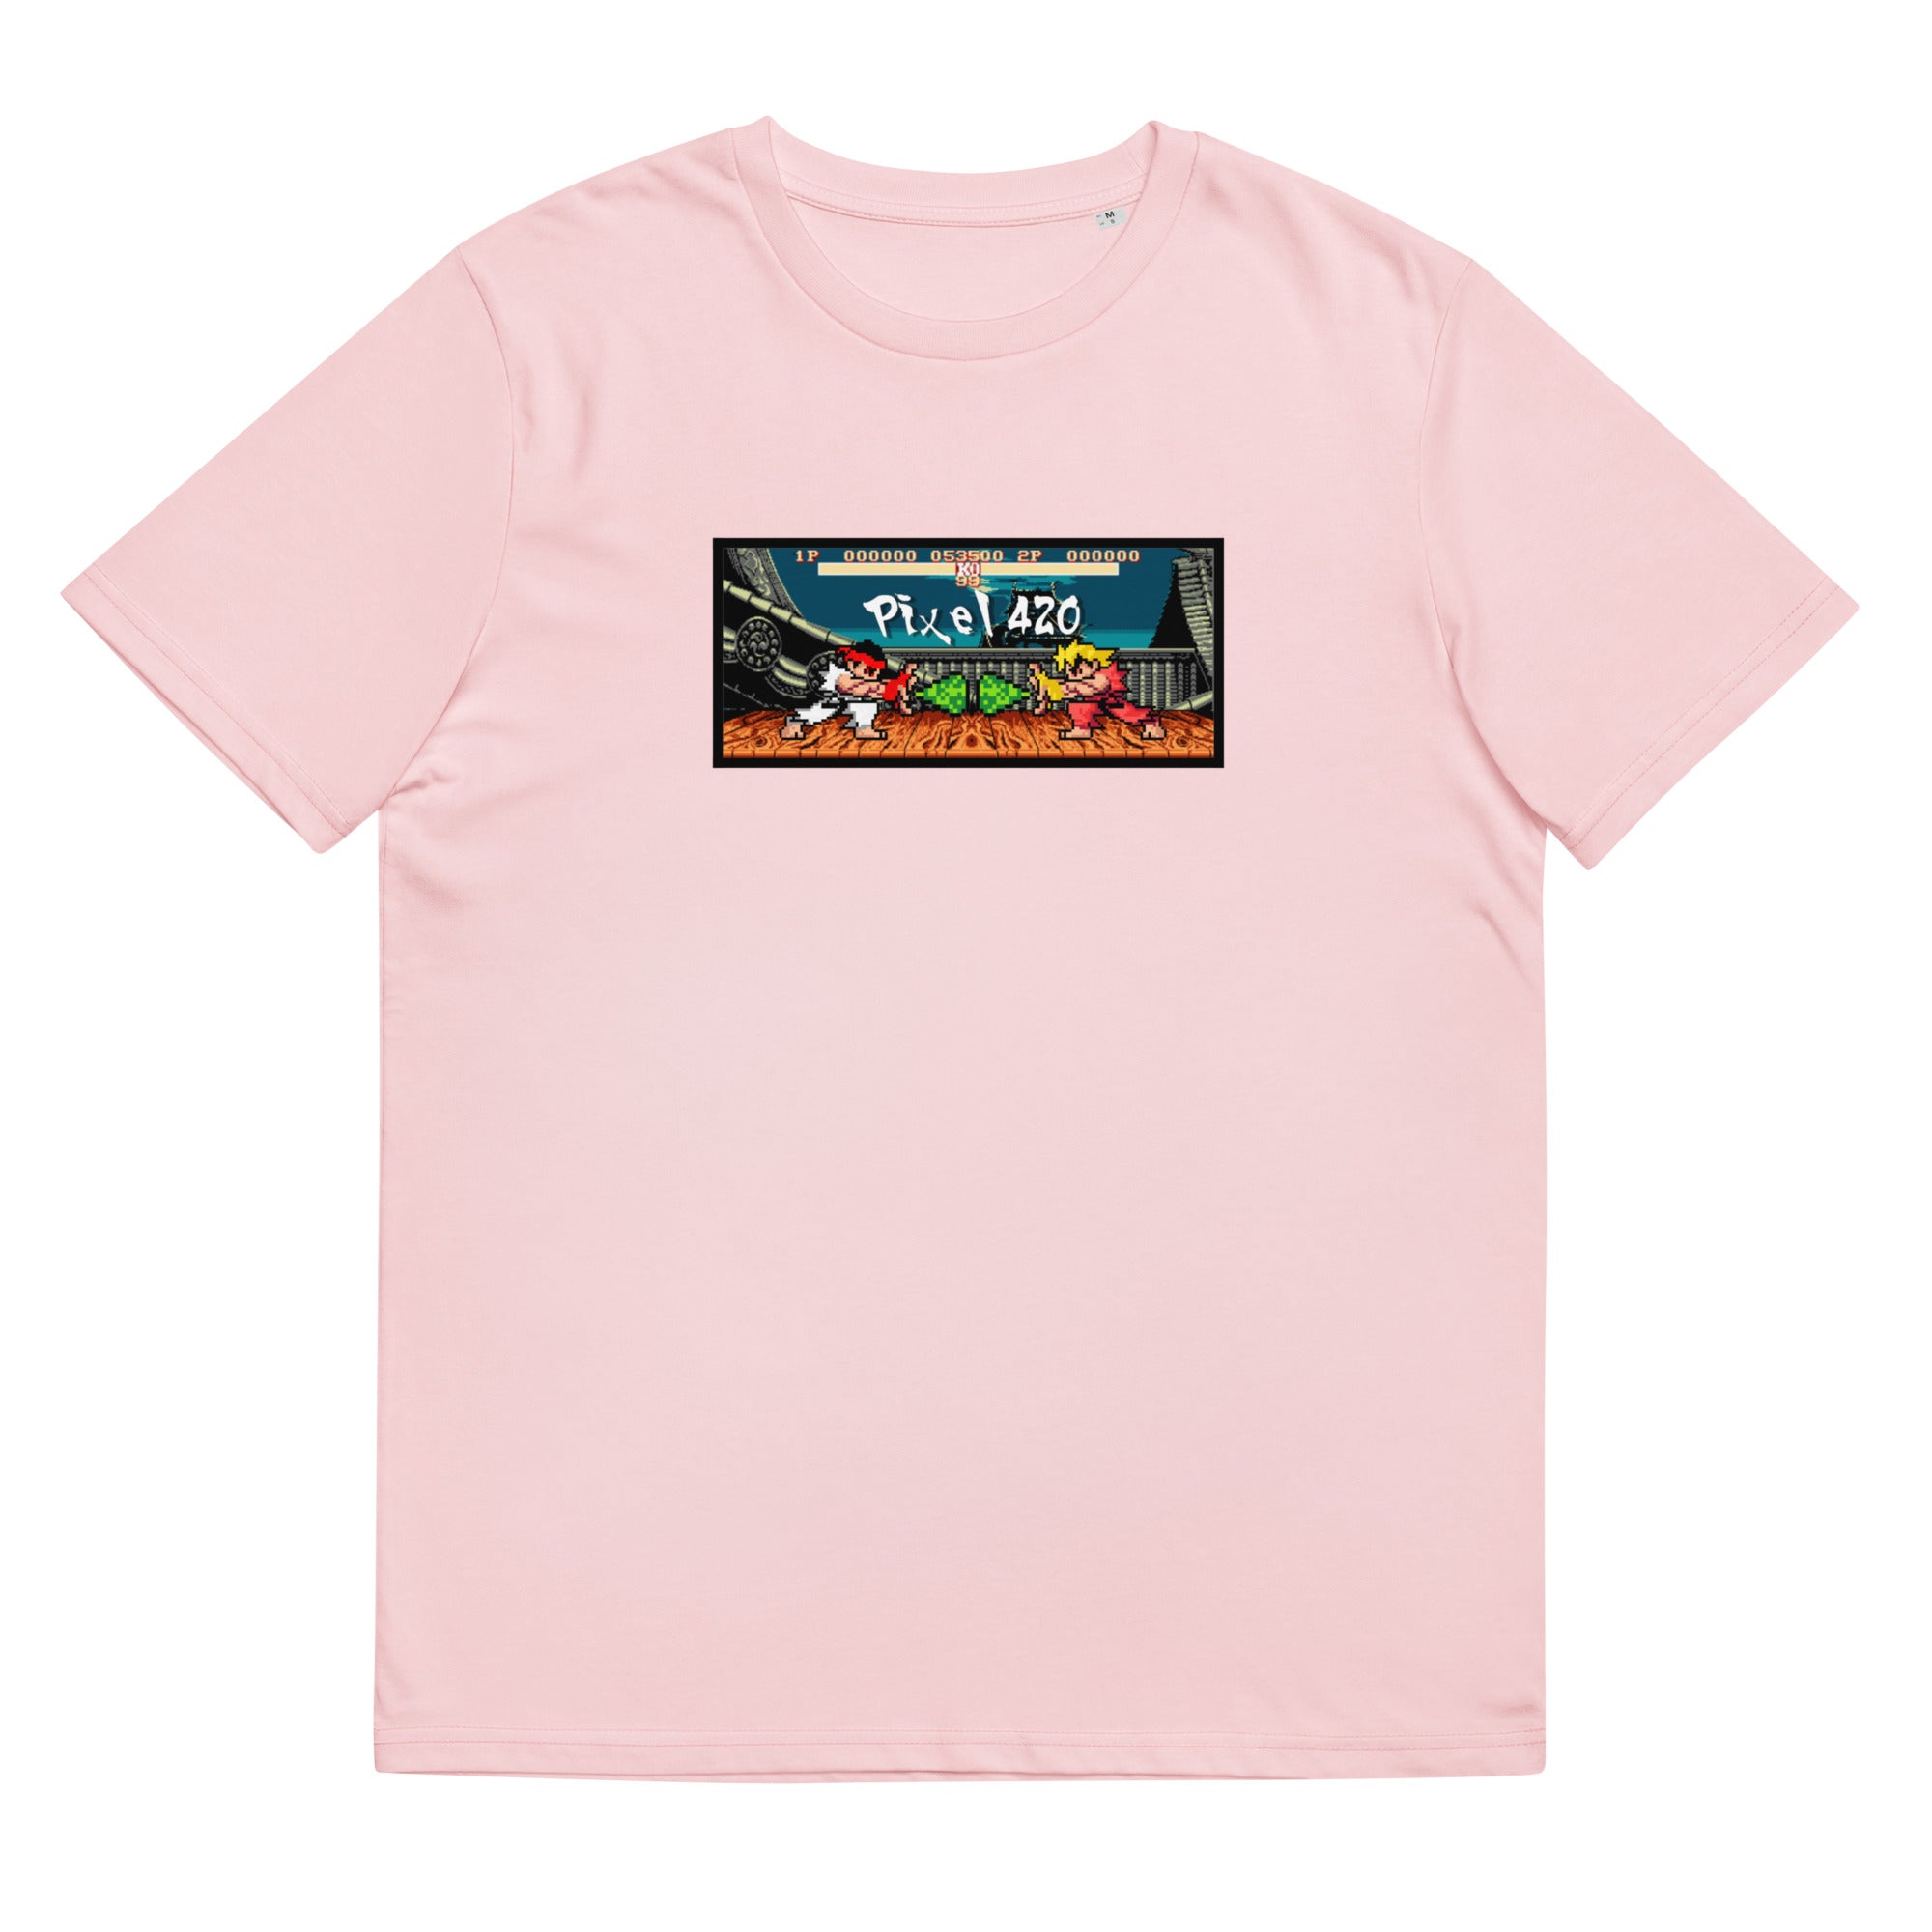 Weed Fighter organic unisex t-shirt pink